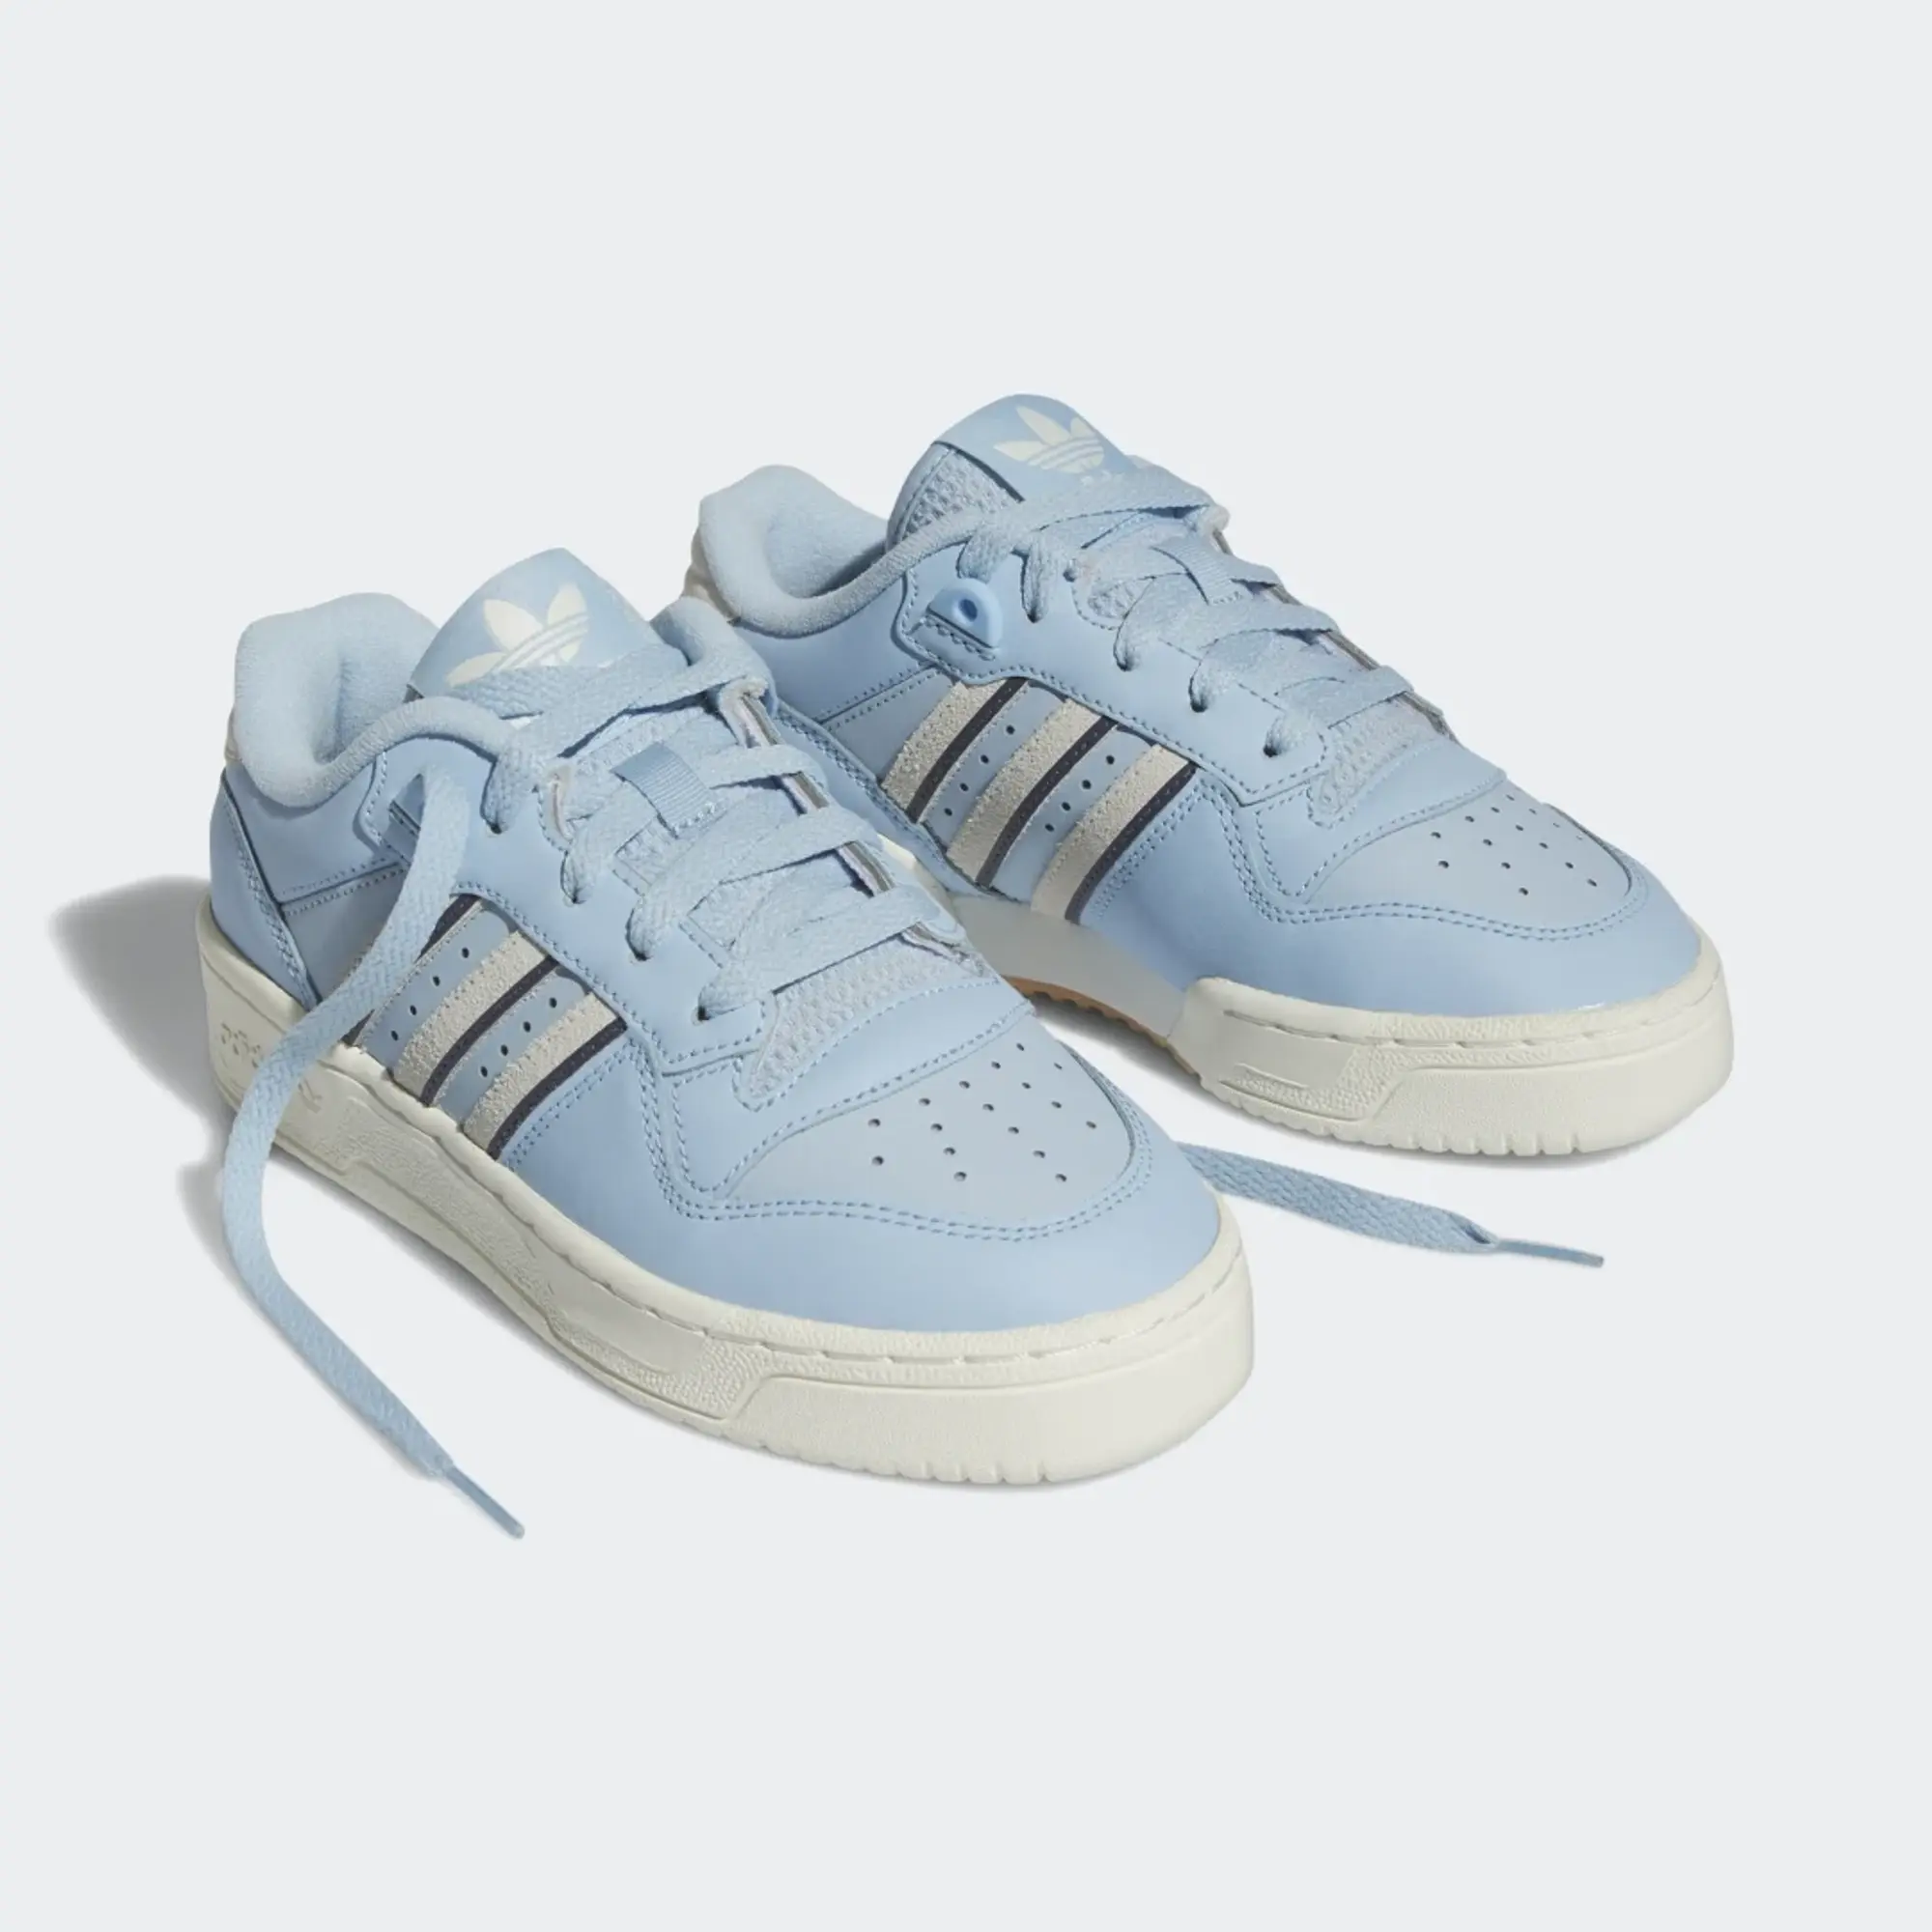 adidas Originals Rivalry Low Shoes Kids - Clear Sky  - Kids